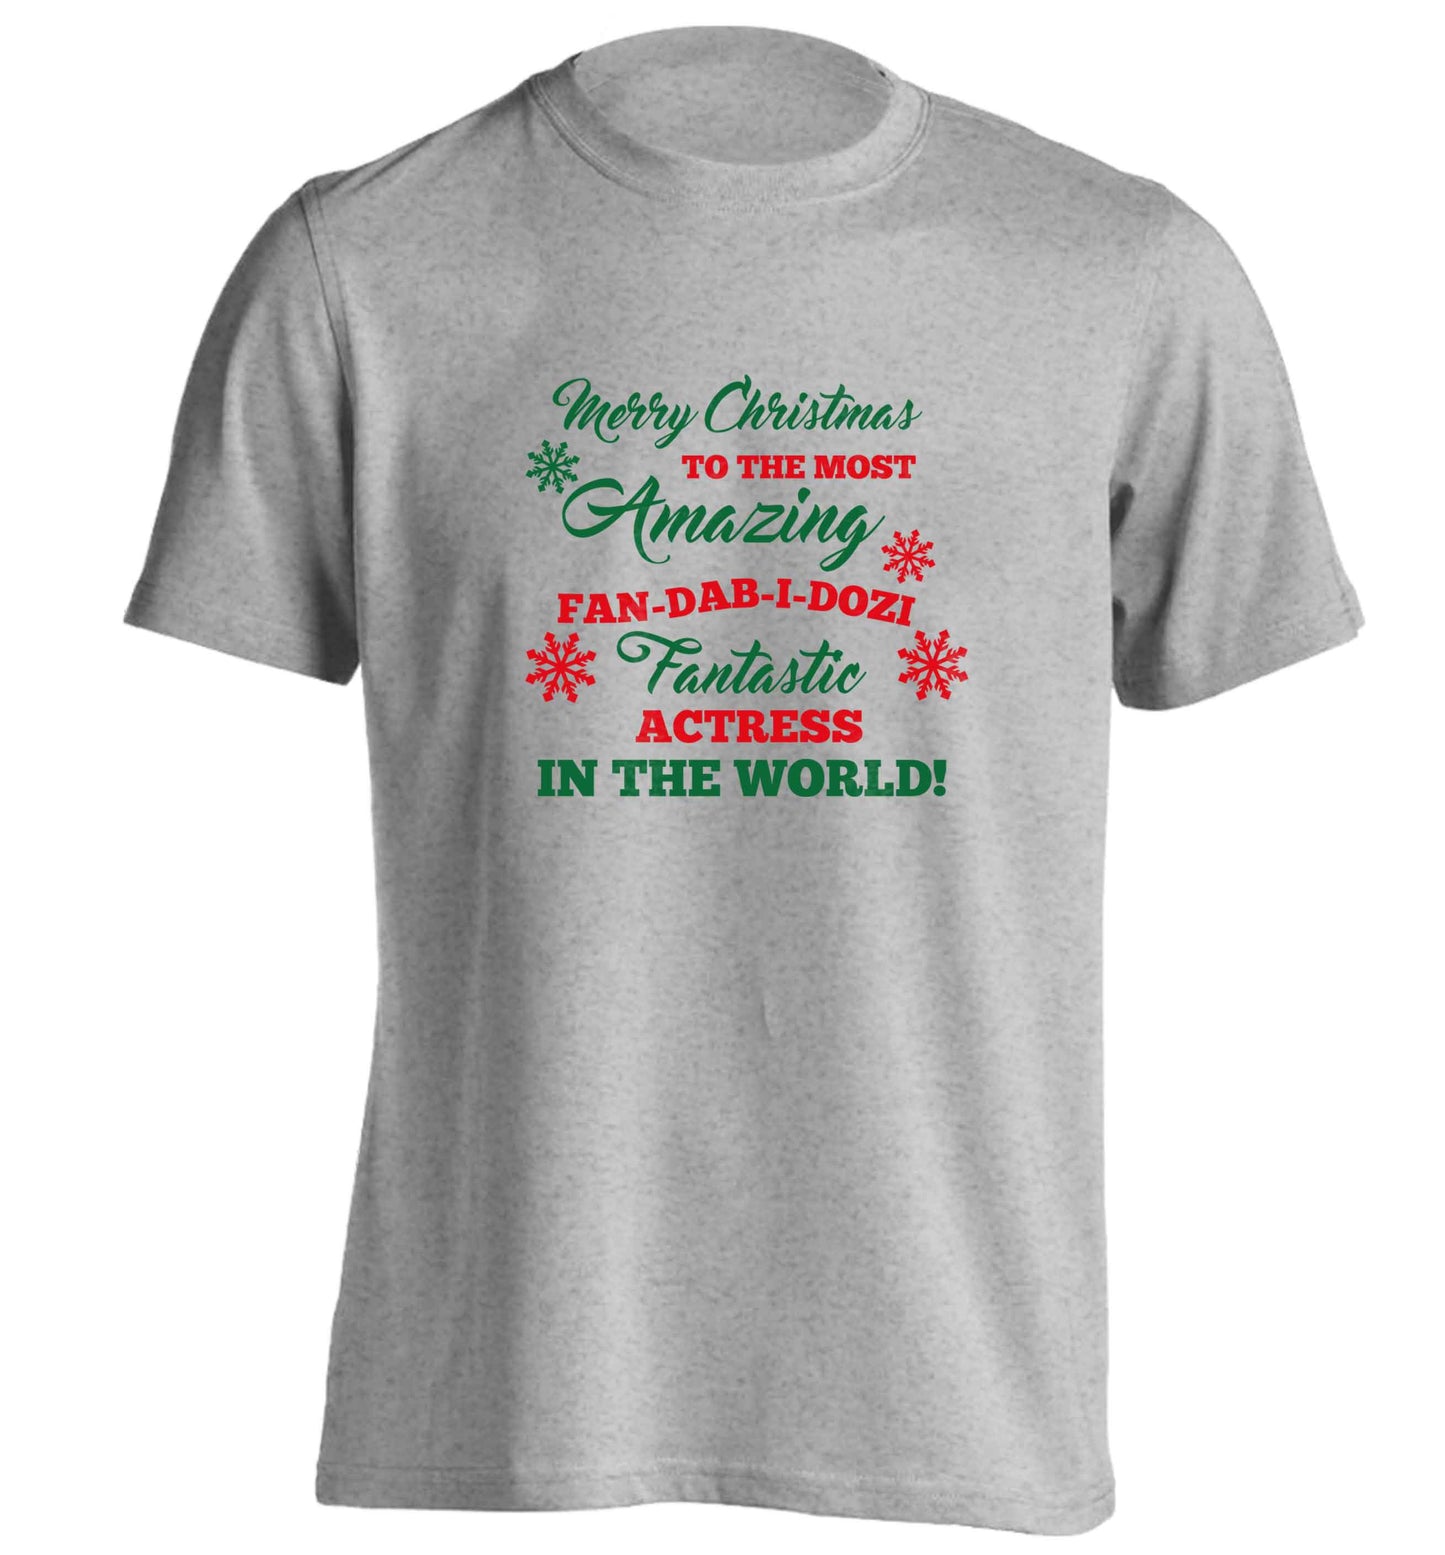 Merry Christmas to the most amazing actress in the world! adults unisex grey Tshirt 2XL